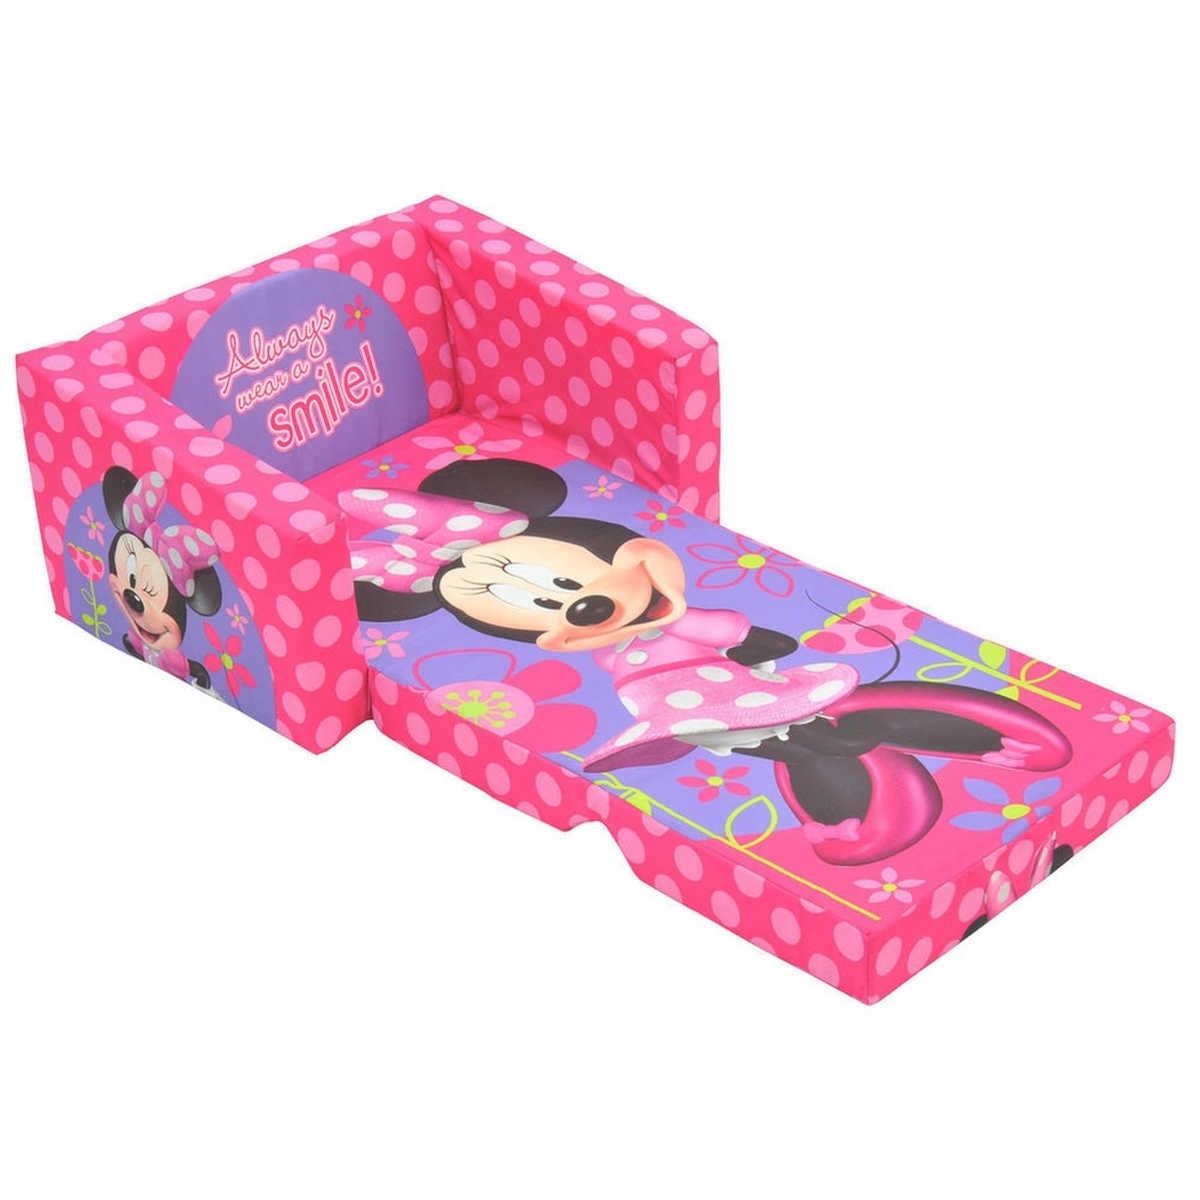 Minnie Mouse Flip Out Sofa Bed • Sofa Bed For Flip Out Sofas (View 5 of 10)